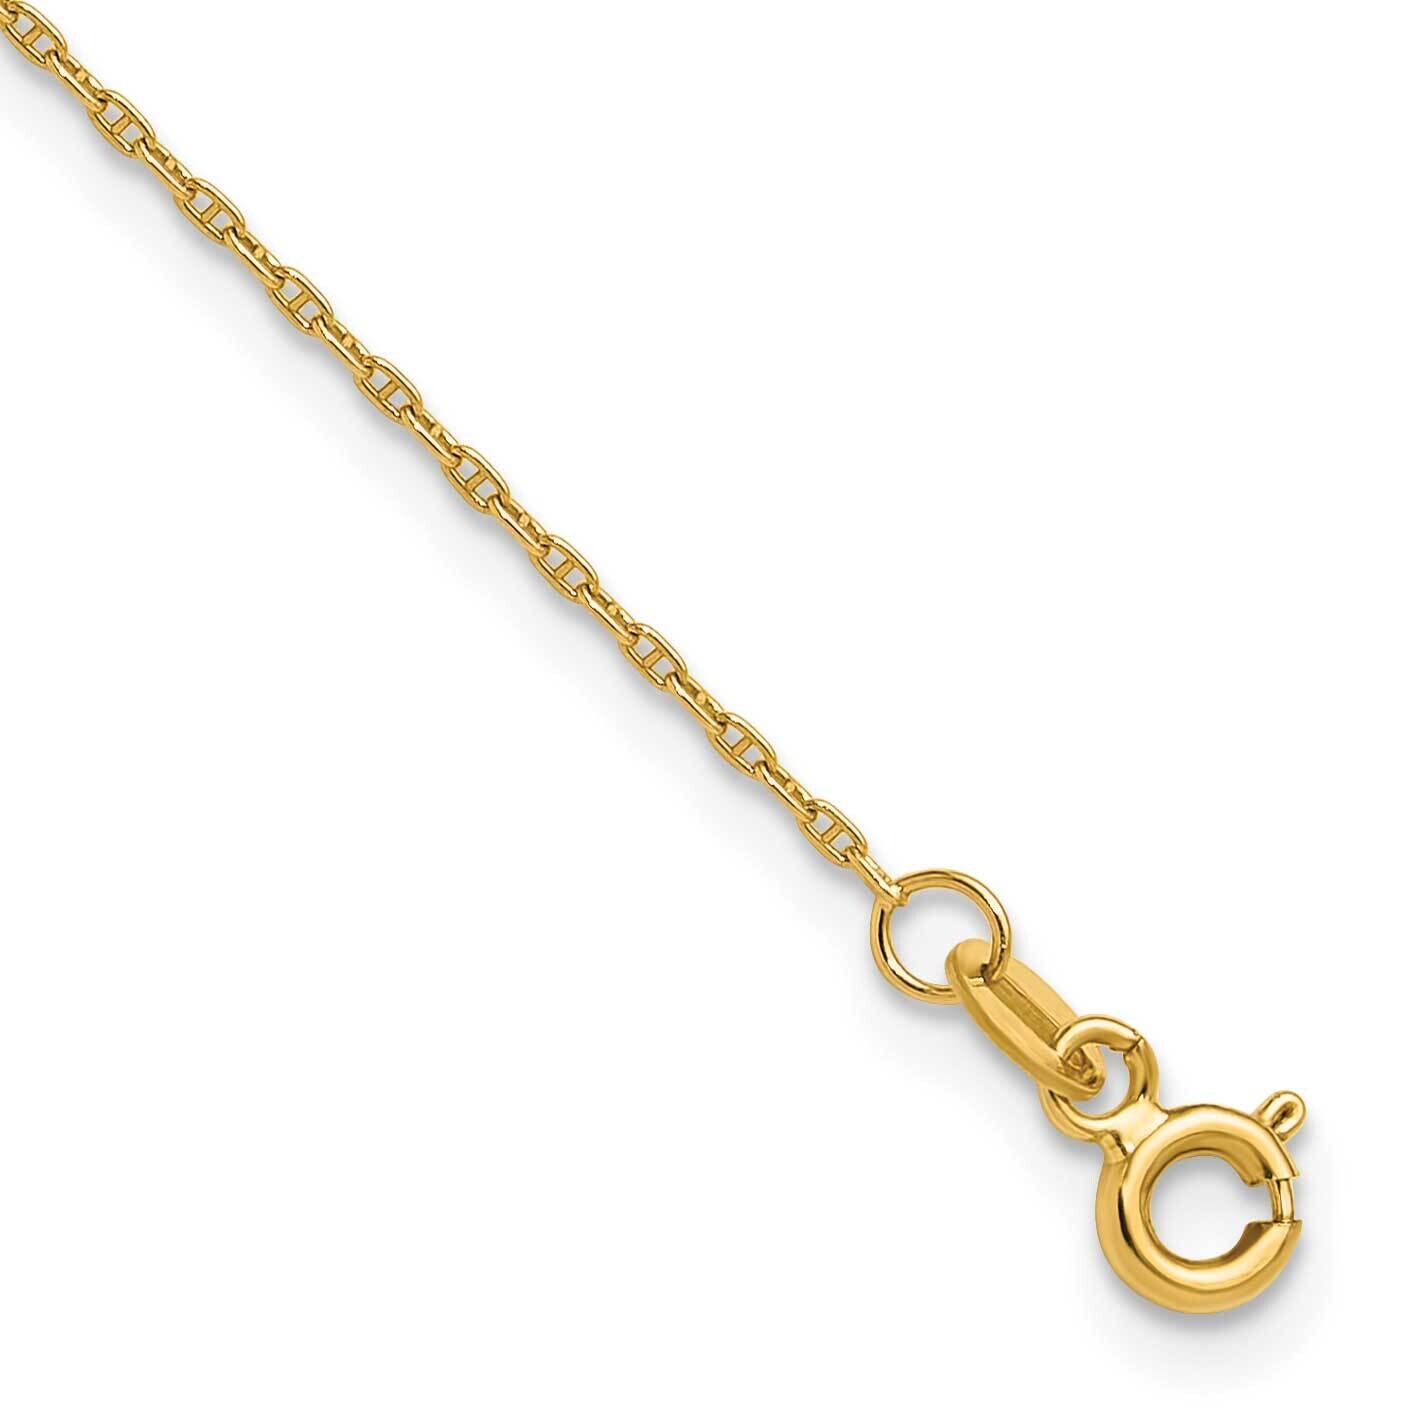 1.05mm Mariners Link Chain 9 Inch 14k Gold MA030-9